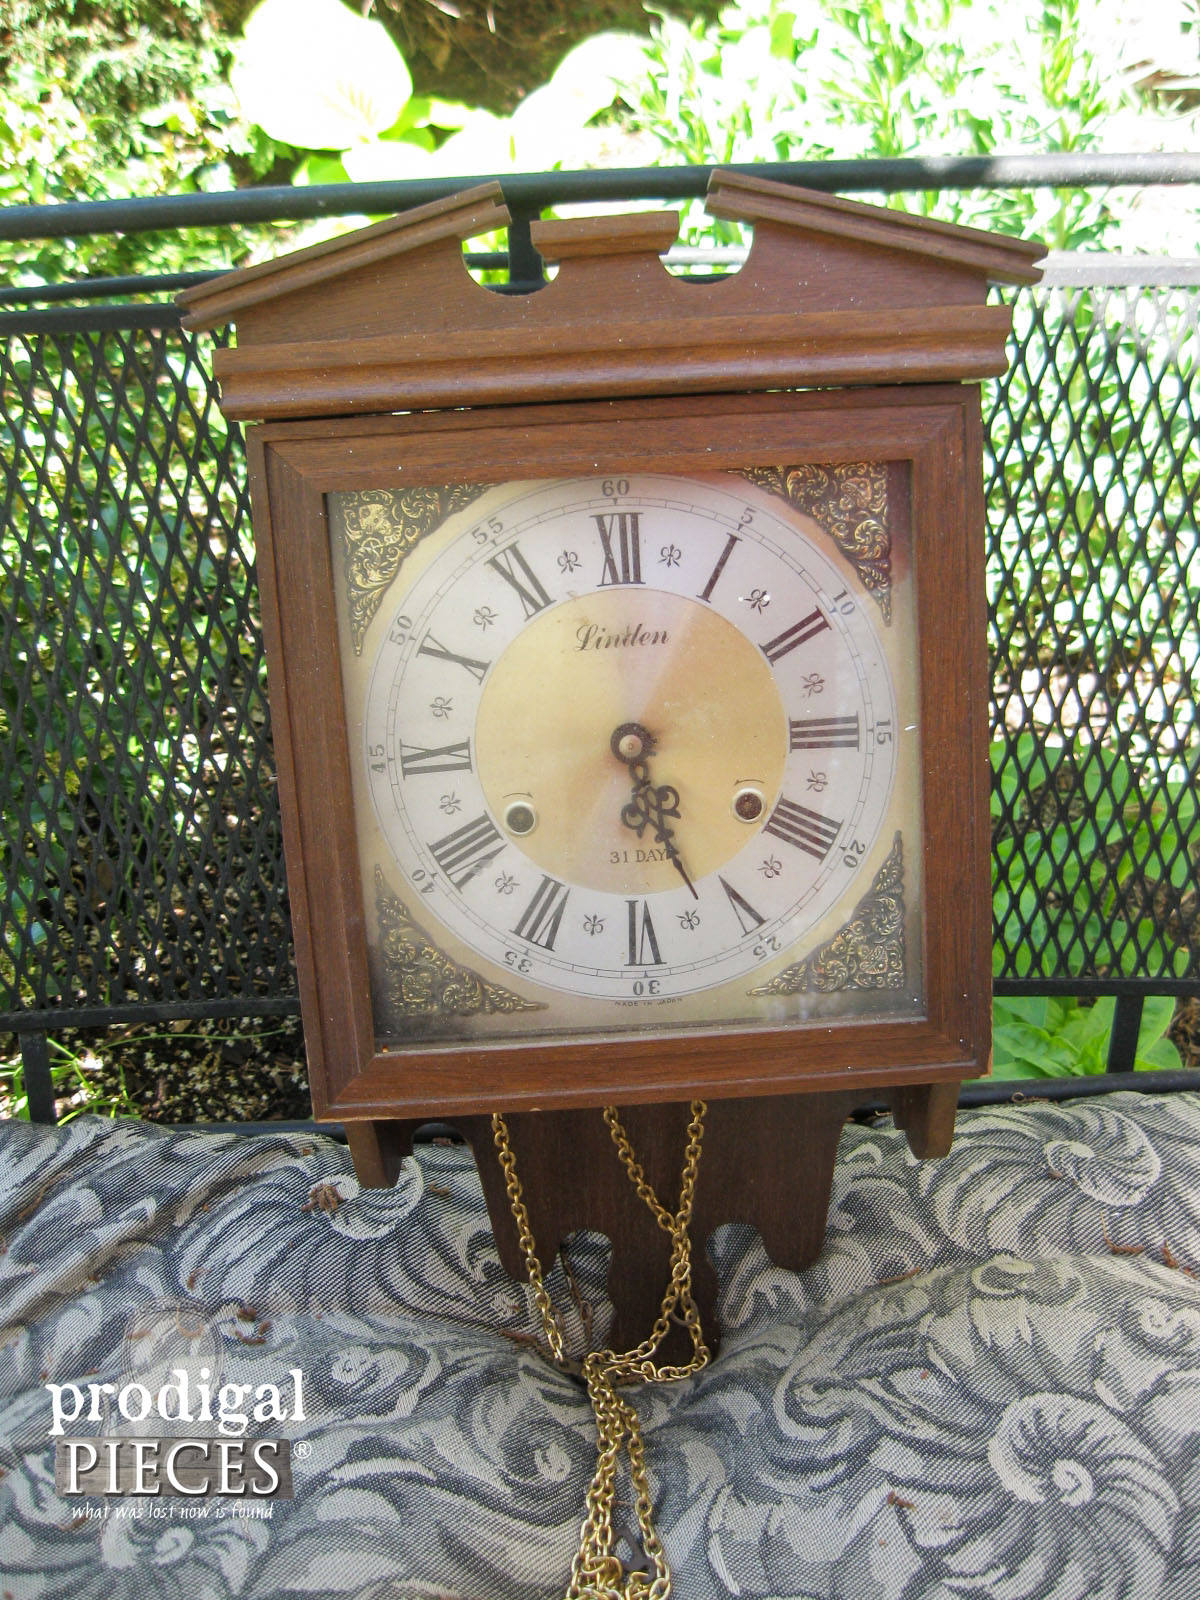 Vintage Clock Found Curbside Before Repurposing | Prodigal Pieces | www.prodigalpieces.com